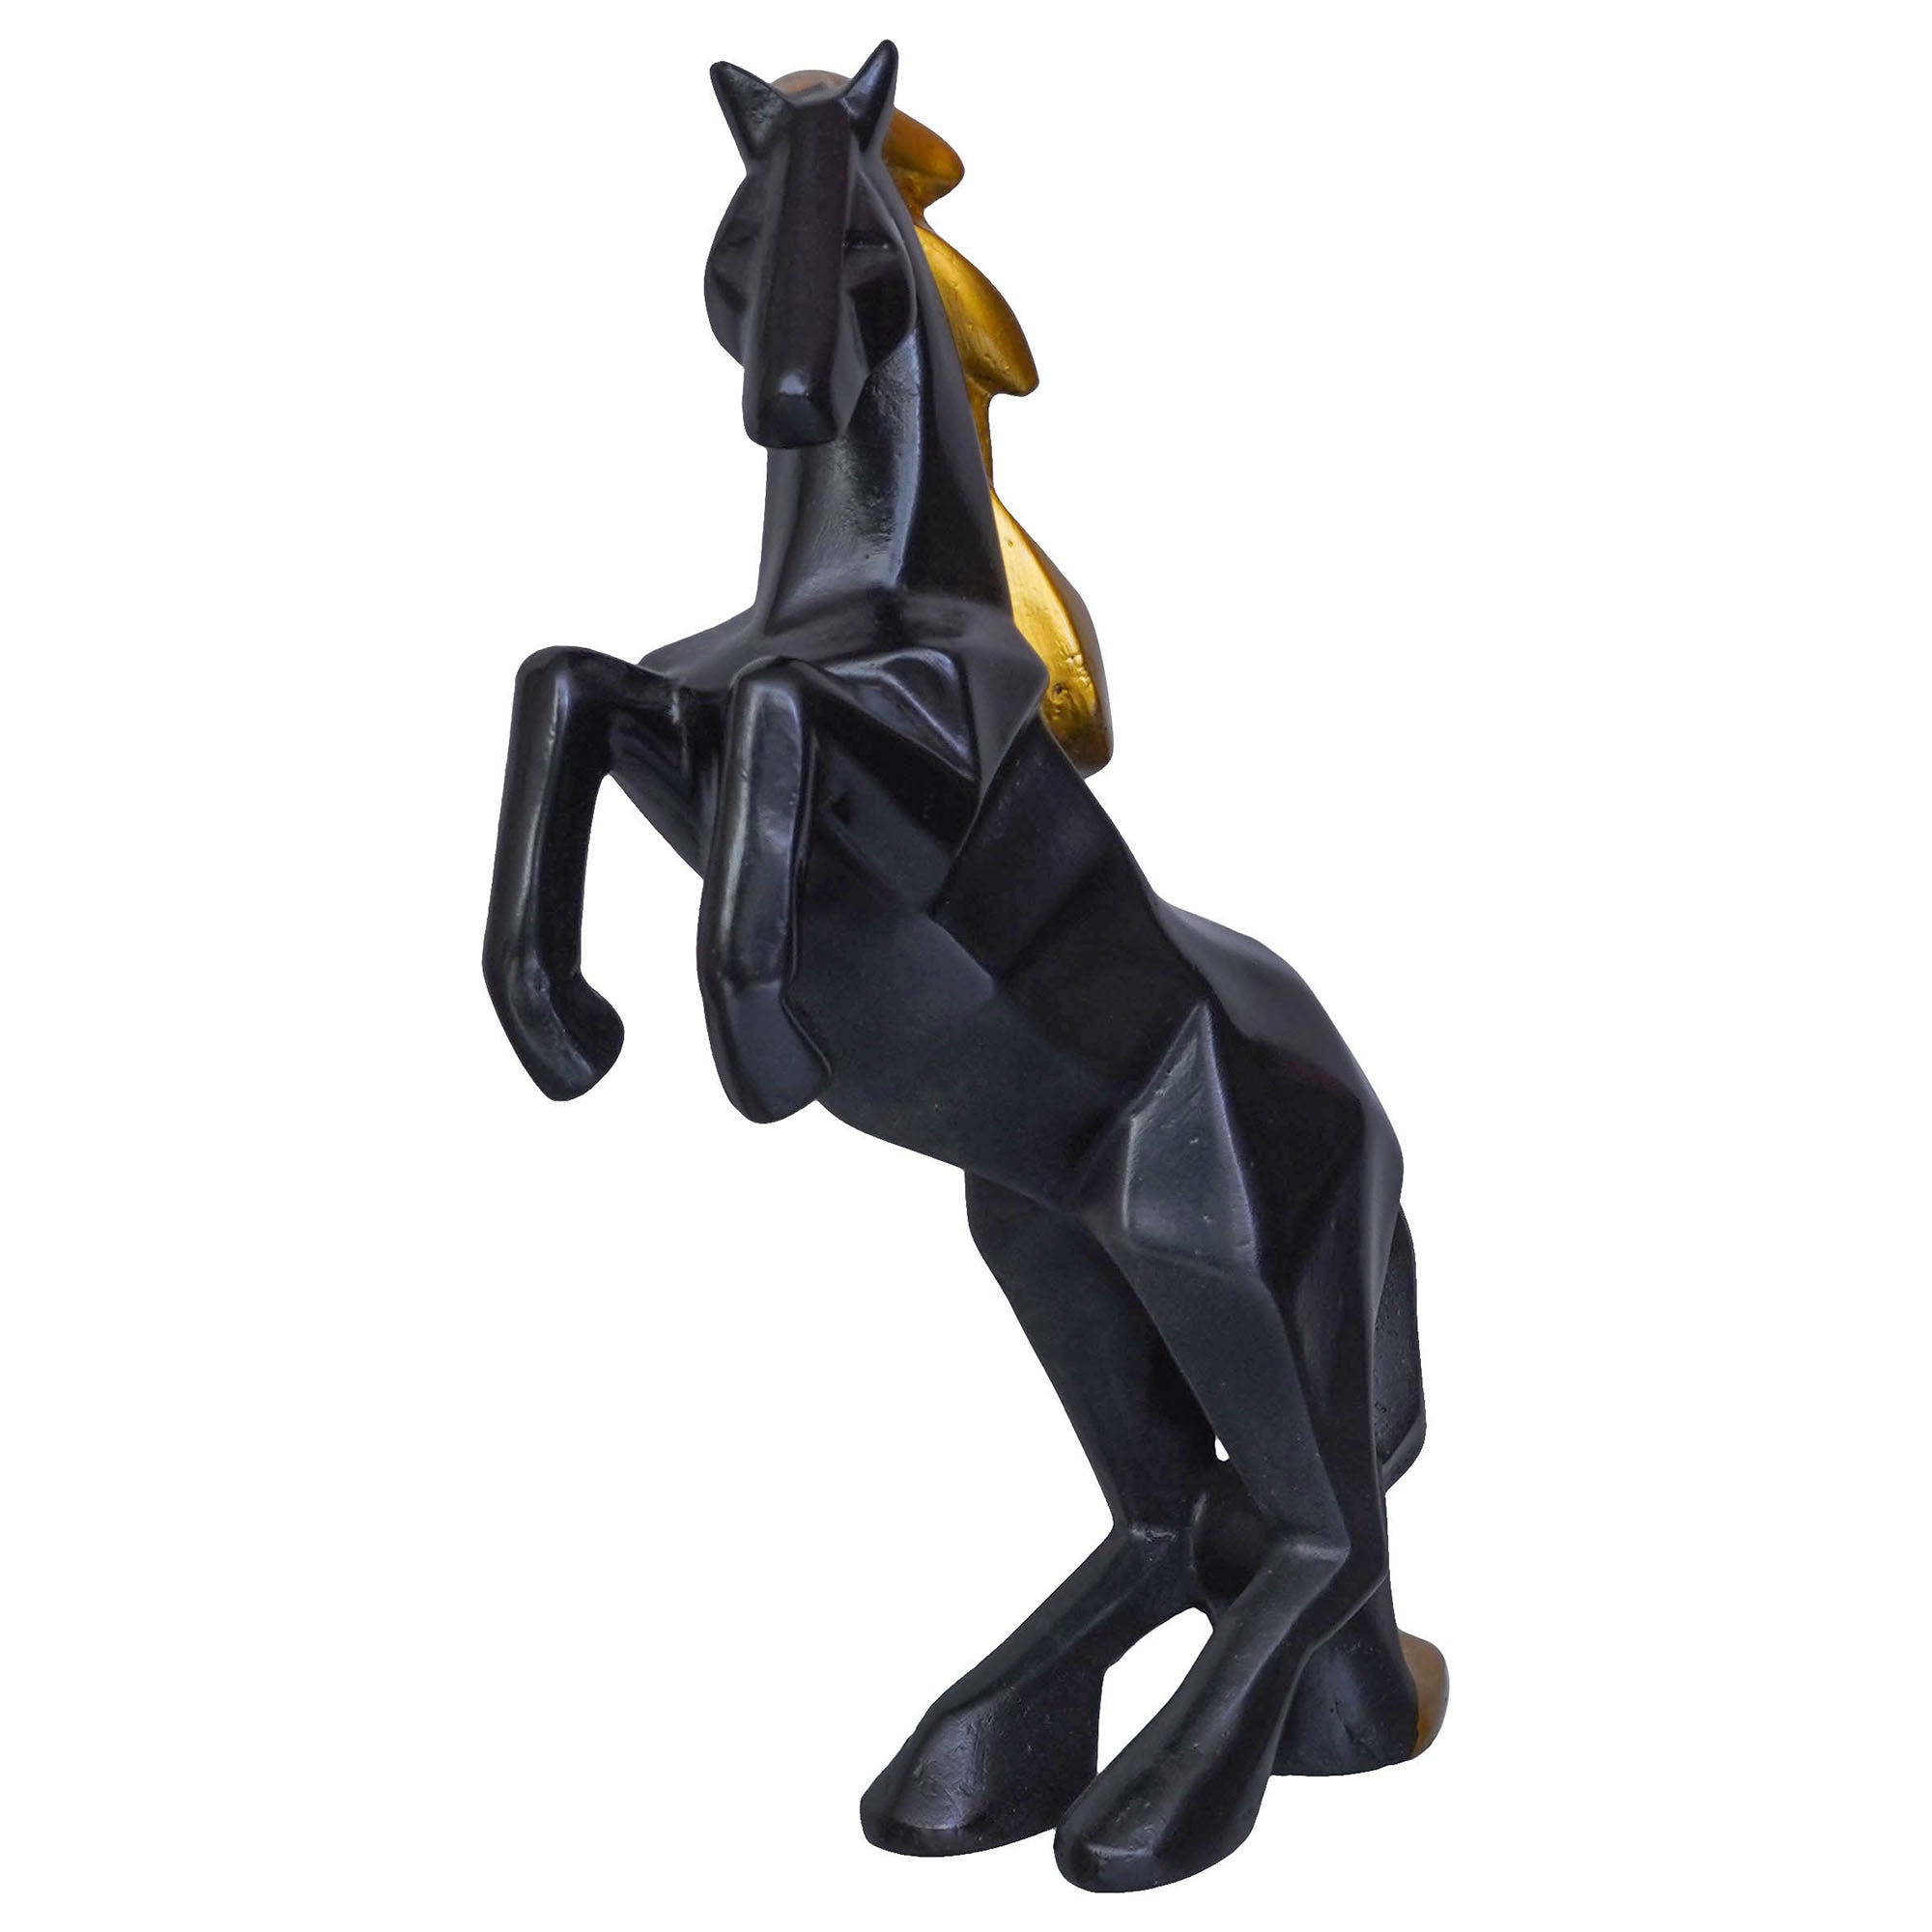 Black Polyresin Jumping Horse Statue with Golden Hair Animal Figurine 7